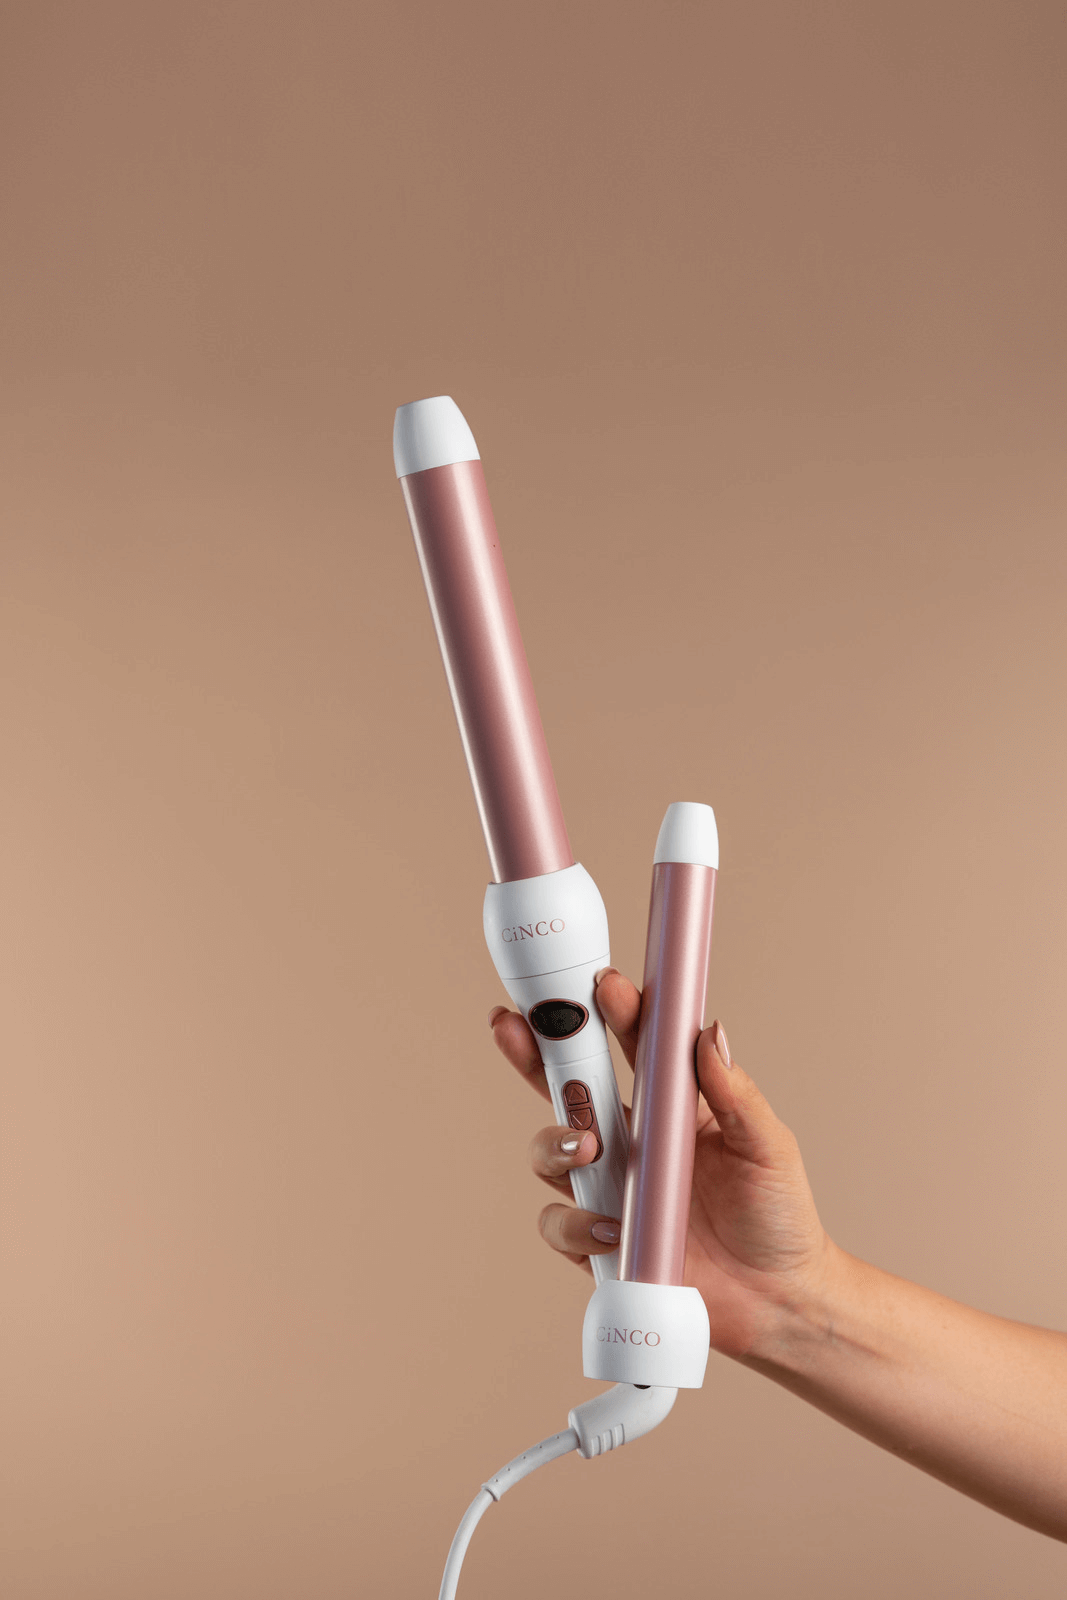 A photo of the best hair styling wand for curly hair, BY CINCO